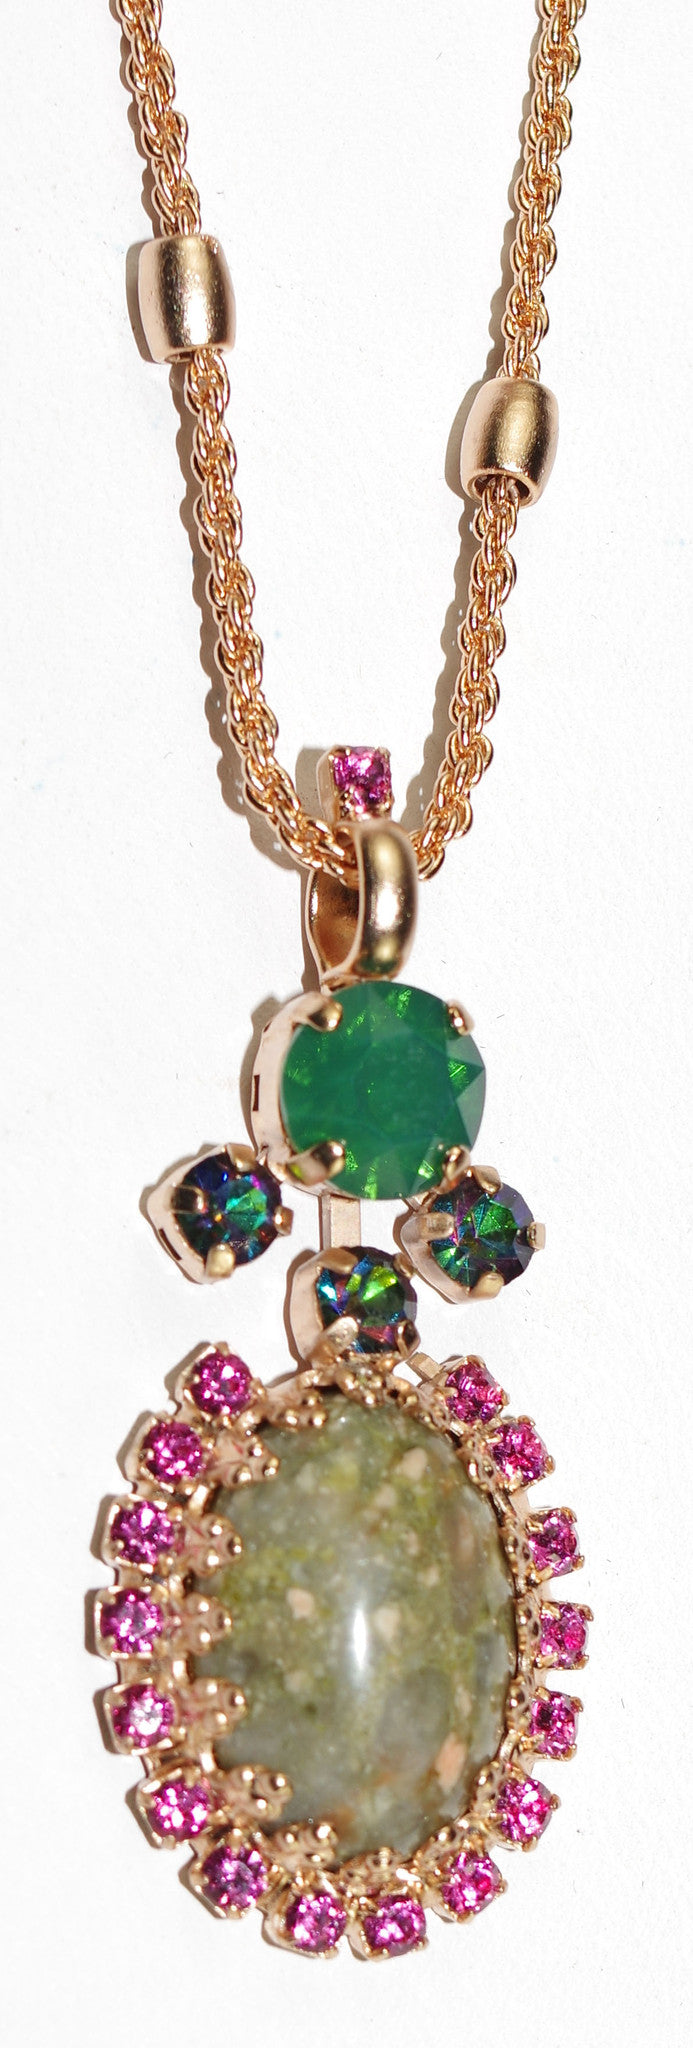 MARIANA PENDANT LUCK: green, pink stones in rose gold setting, 20" adjustable chain